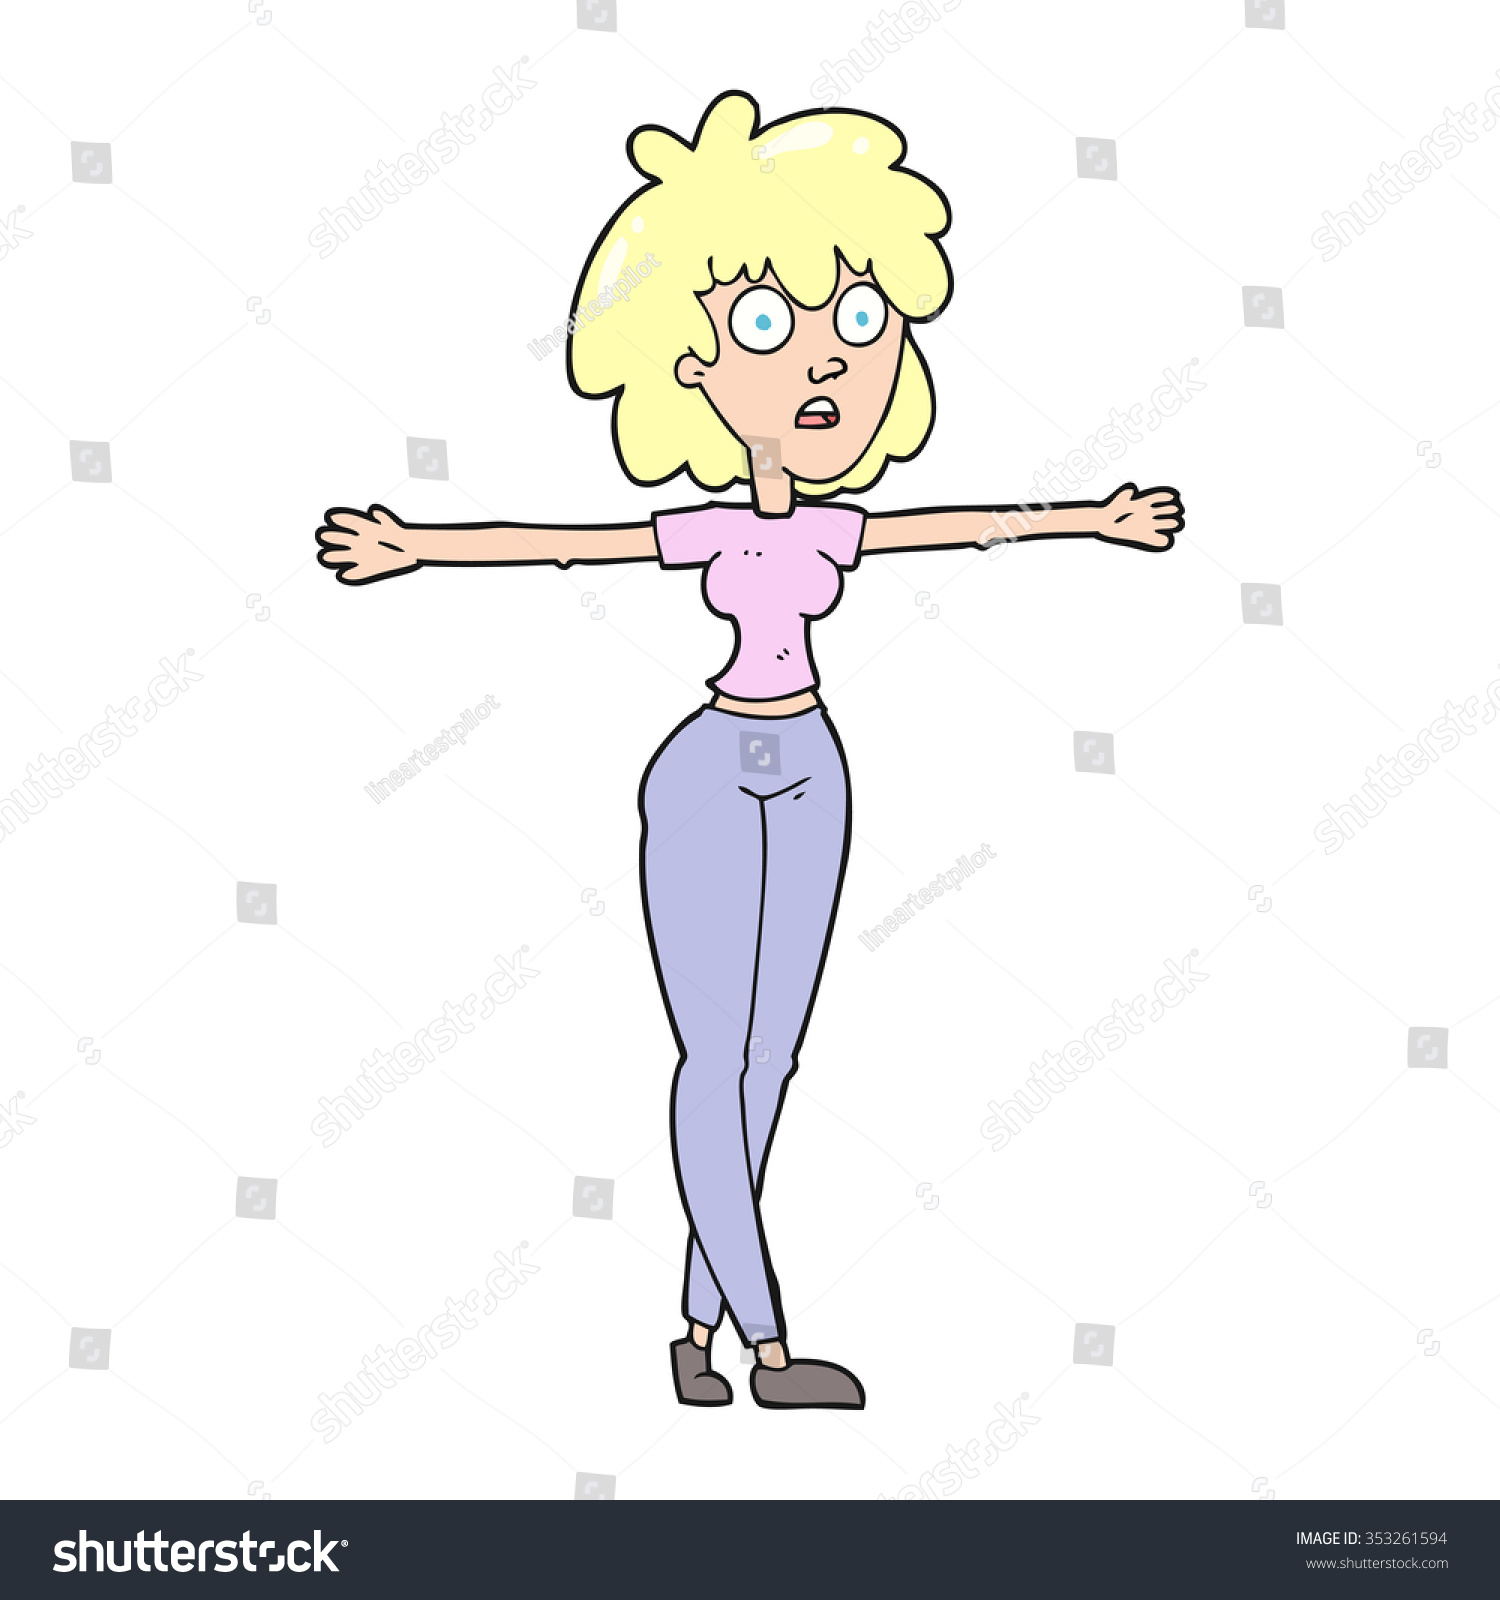 Freehand Drawn Cartoon Woman Spreading Arms Stock Vector Royalty Free 353261594 Shutterstock